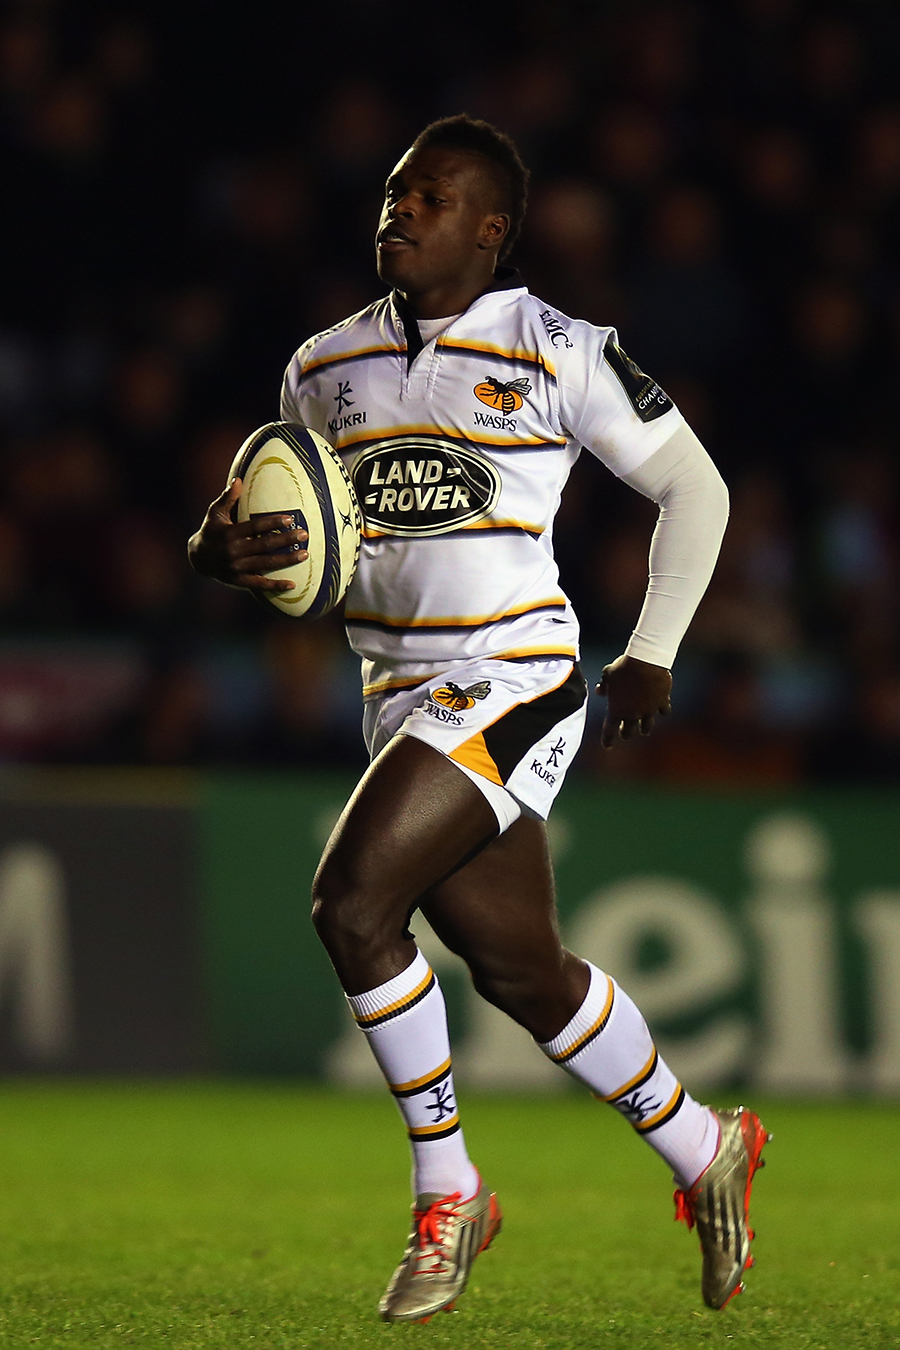 Christian Wade breaks clear to score the opening try